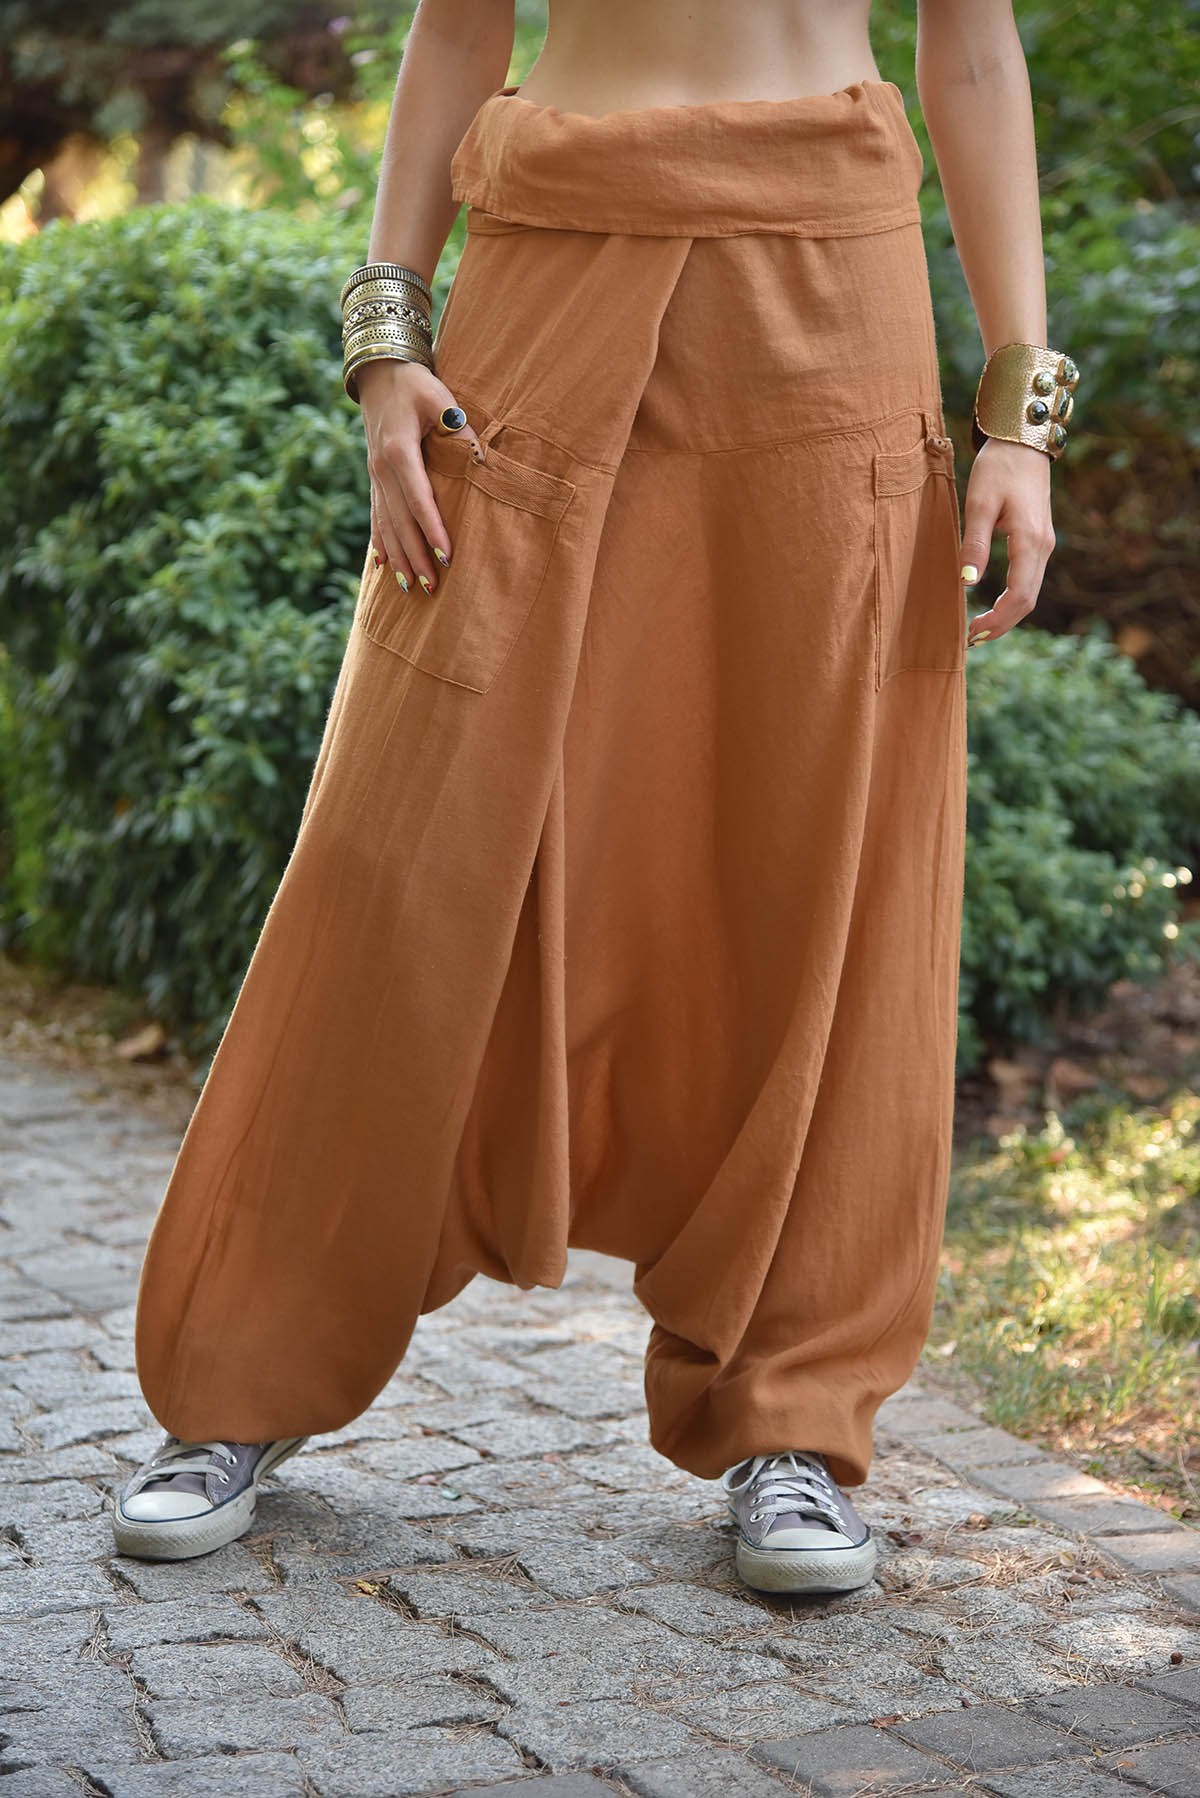 INCERUN Men Thai Fisherman Pants Loose Vintage Solid Color Women Long Pants  2022 Joggers Wide Leg Pants Men Trousers S-5XL - Price history & Review |  AliExpress Seller - YUYU Clothes Store | Alitools.io